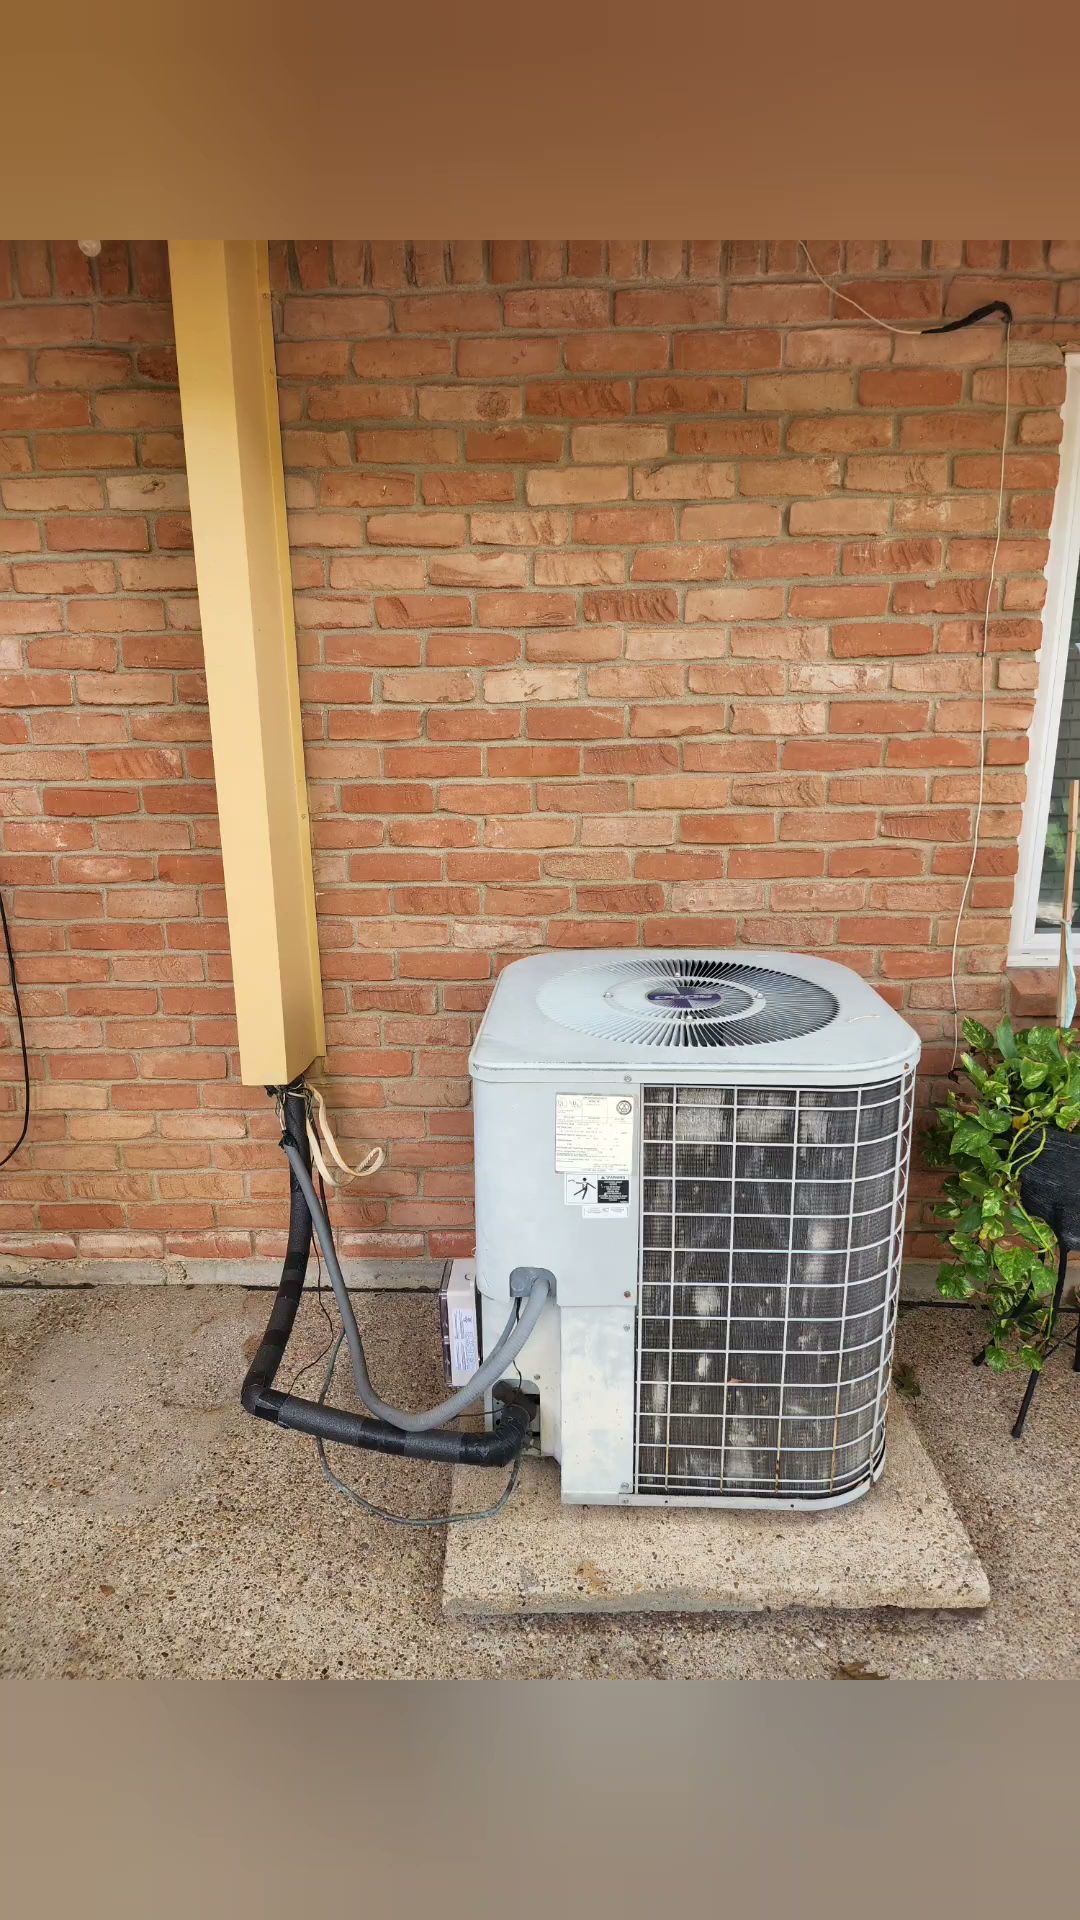 Brazos Air Conditioning 206 Otis Dr, Woodway Texas 76712